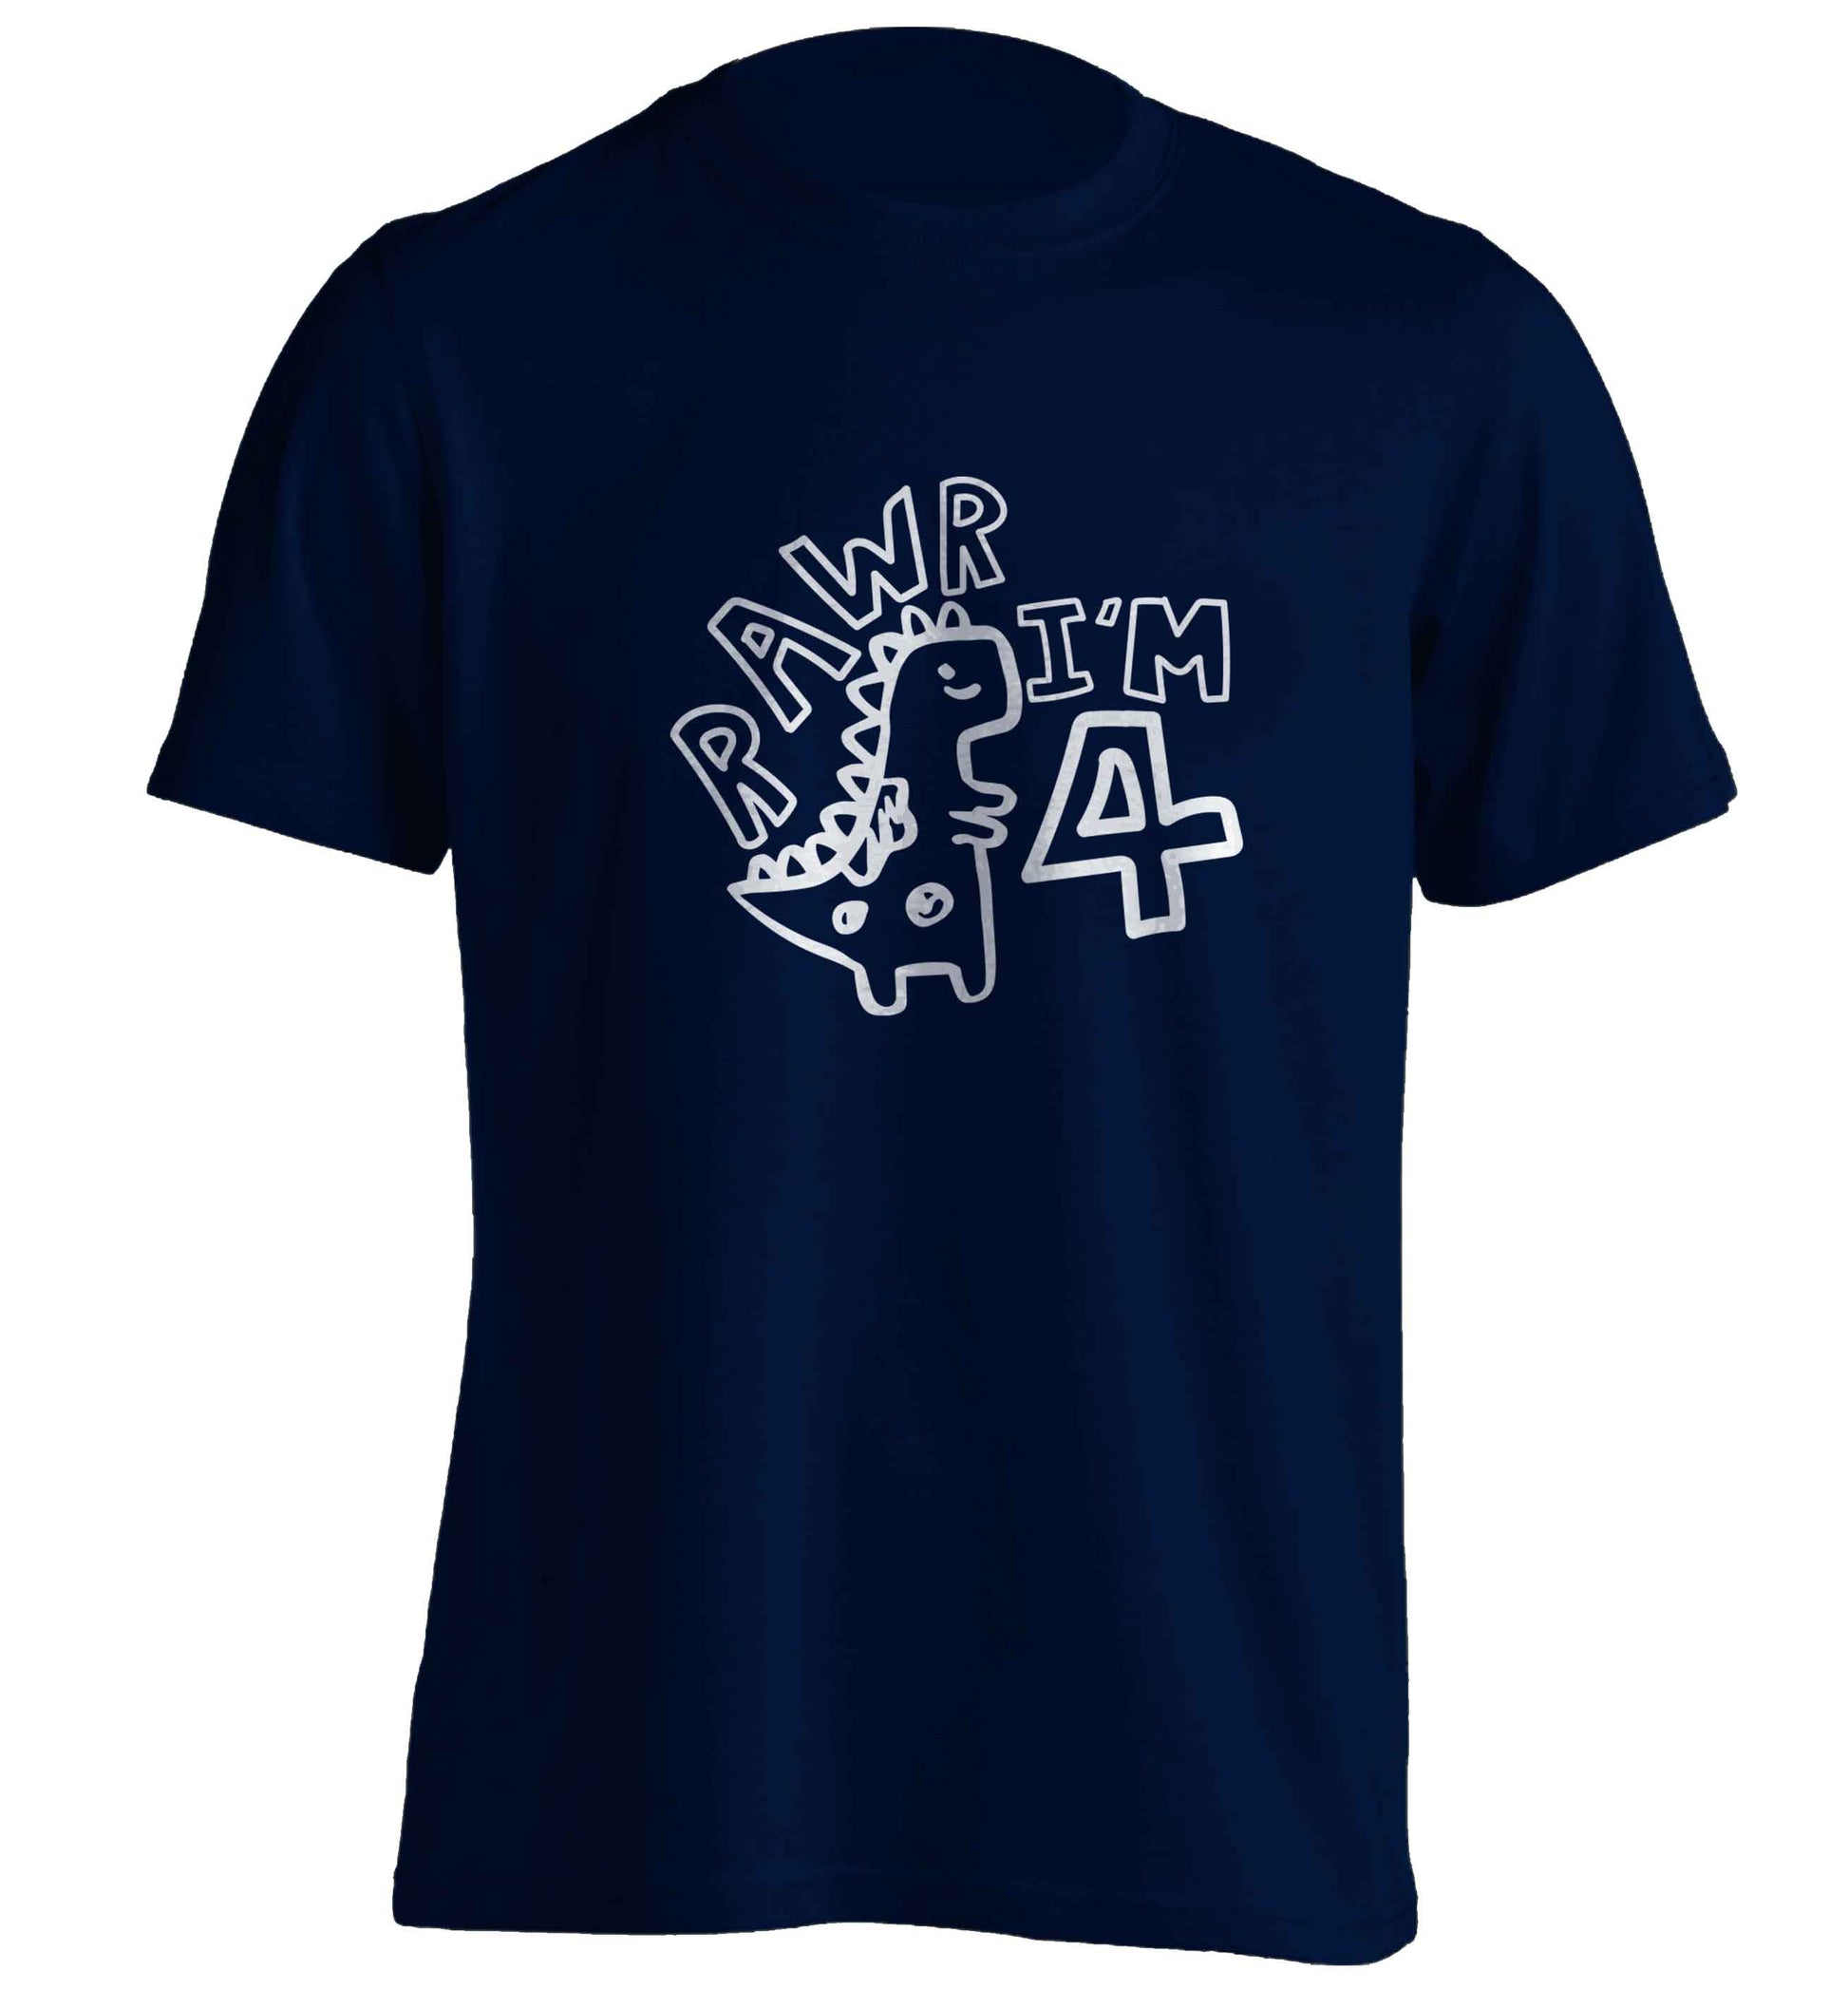 Rawr I'm four - personalise with ANY age! adults unisex navy Tshirt 2XL